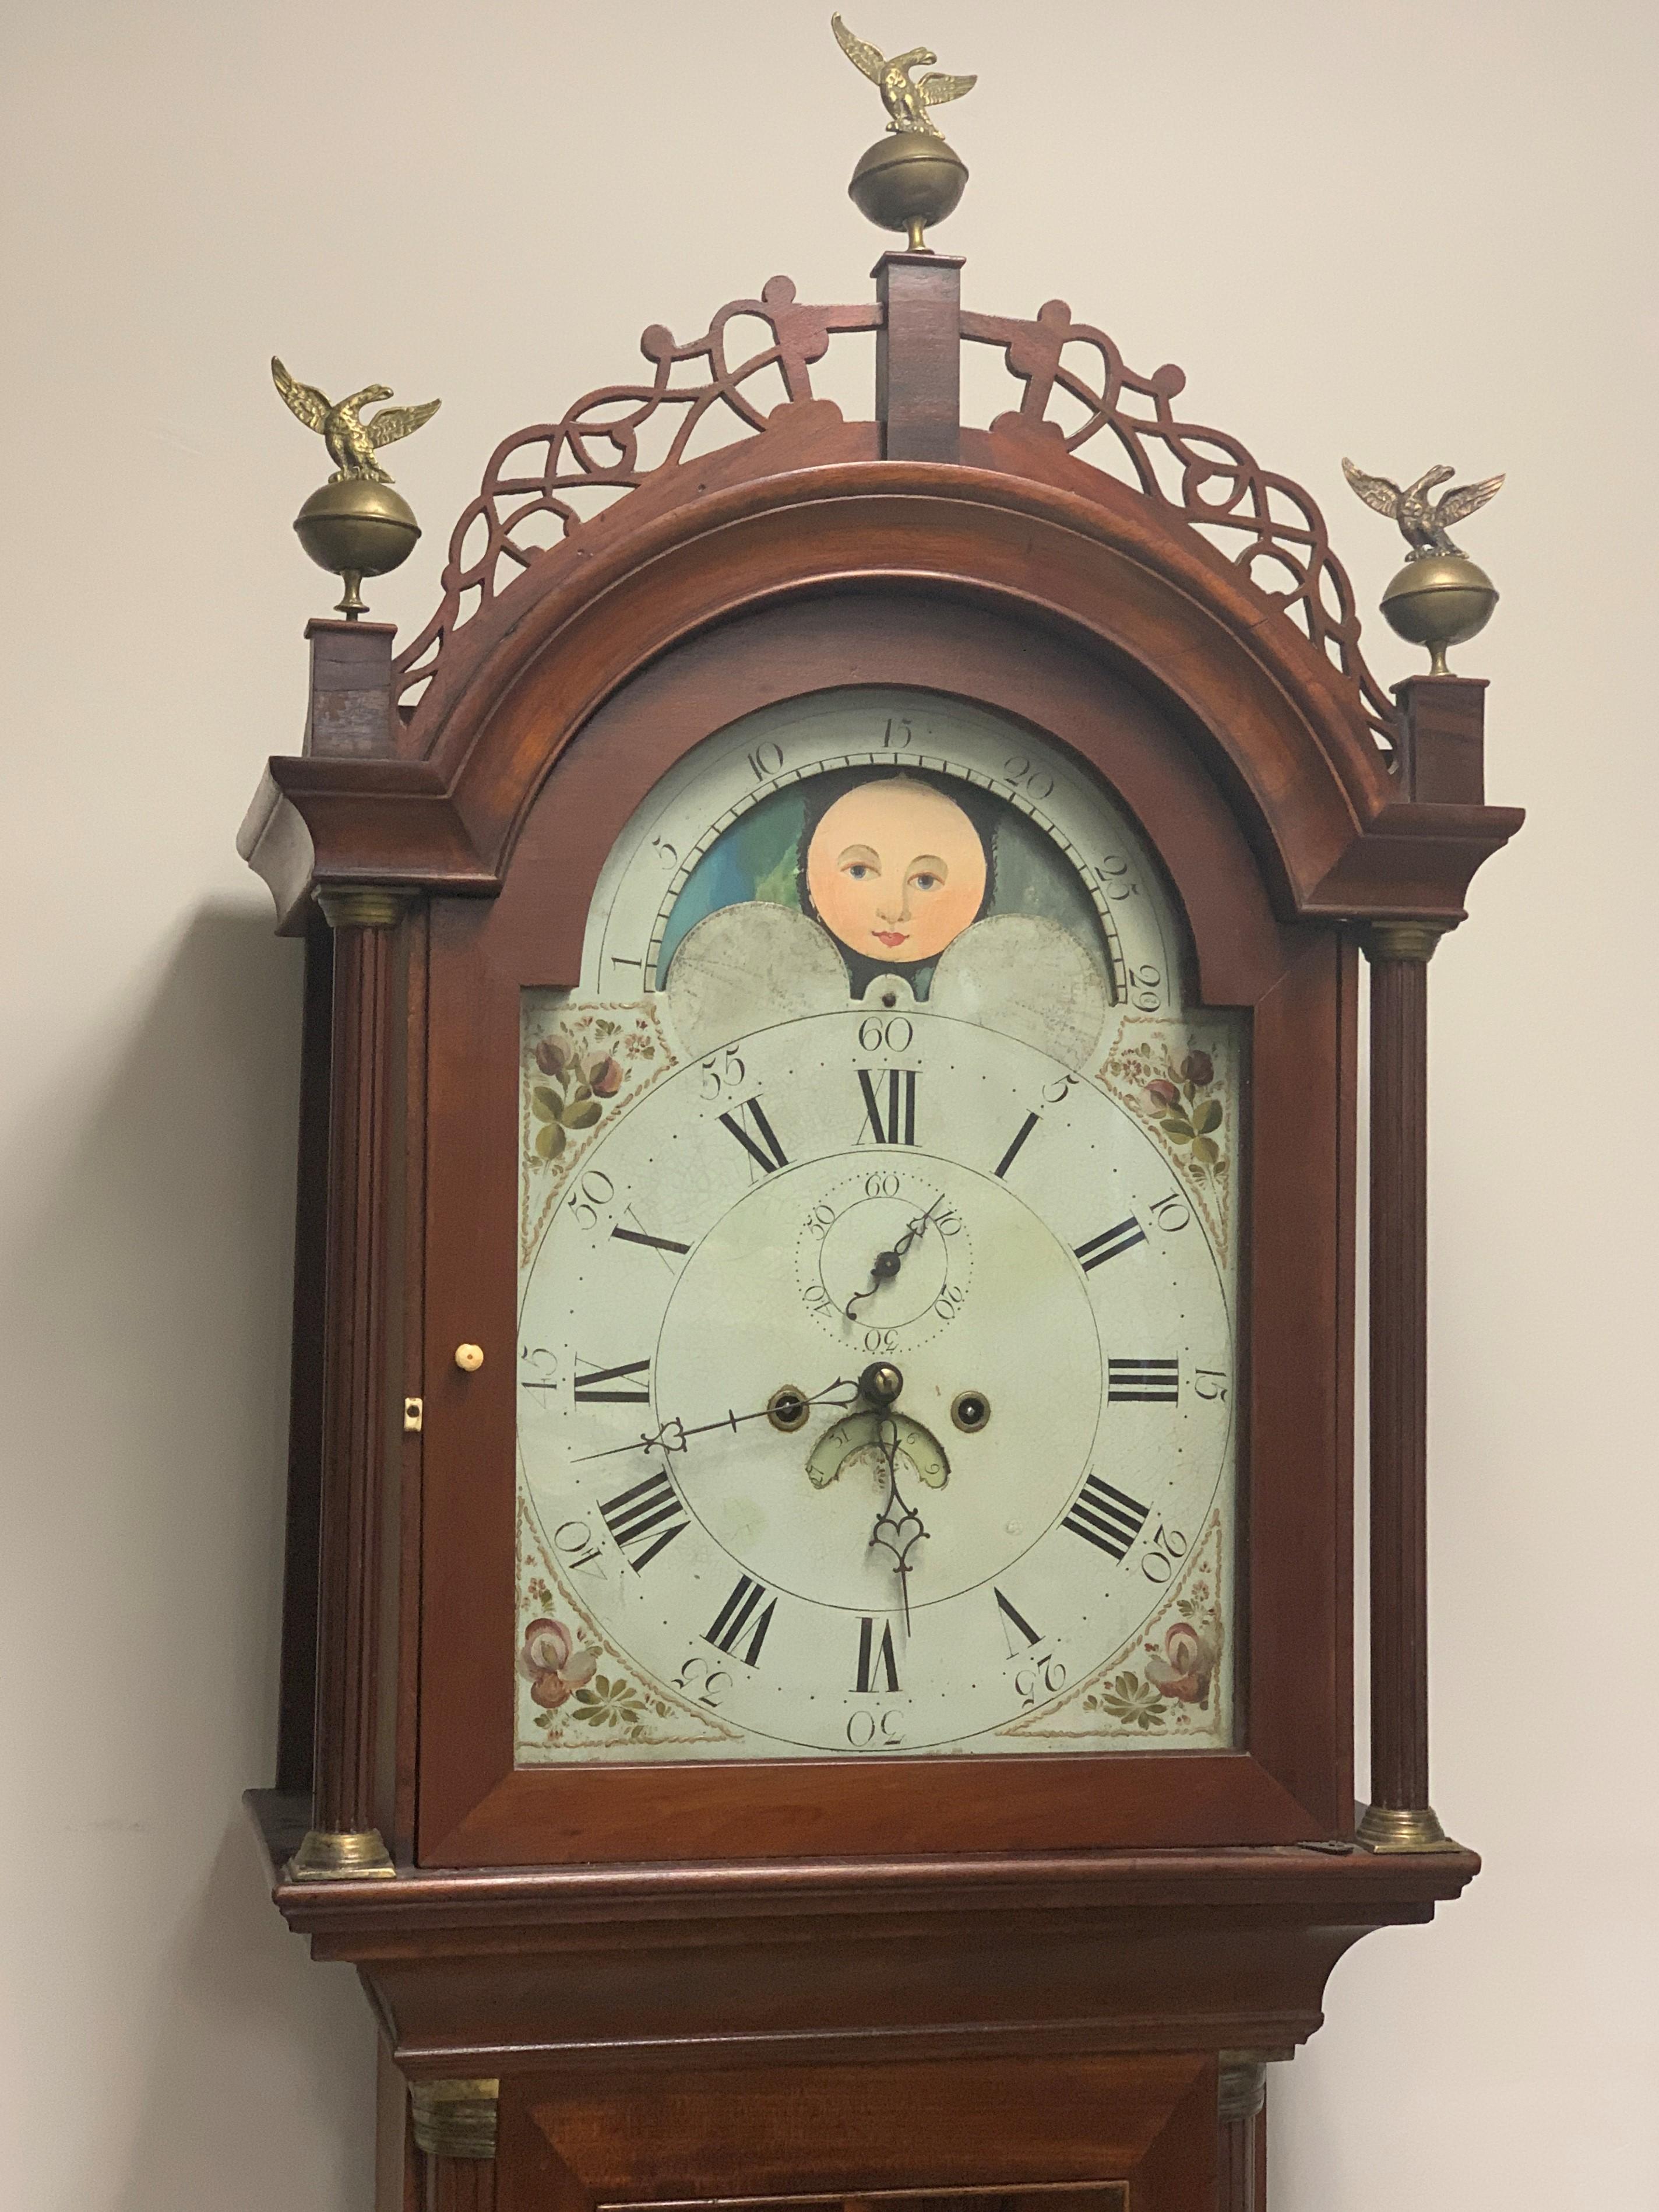 Roxbury type federal type tall case clock from North Shore, Massachusetts, ca 1805-1810.
Mahogany with rosewood crossbanding finial blocks veneered in rosewood.
Vetted, clean clock in all original condition including weights, clock face, finish.